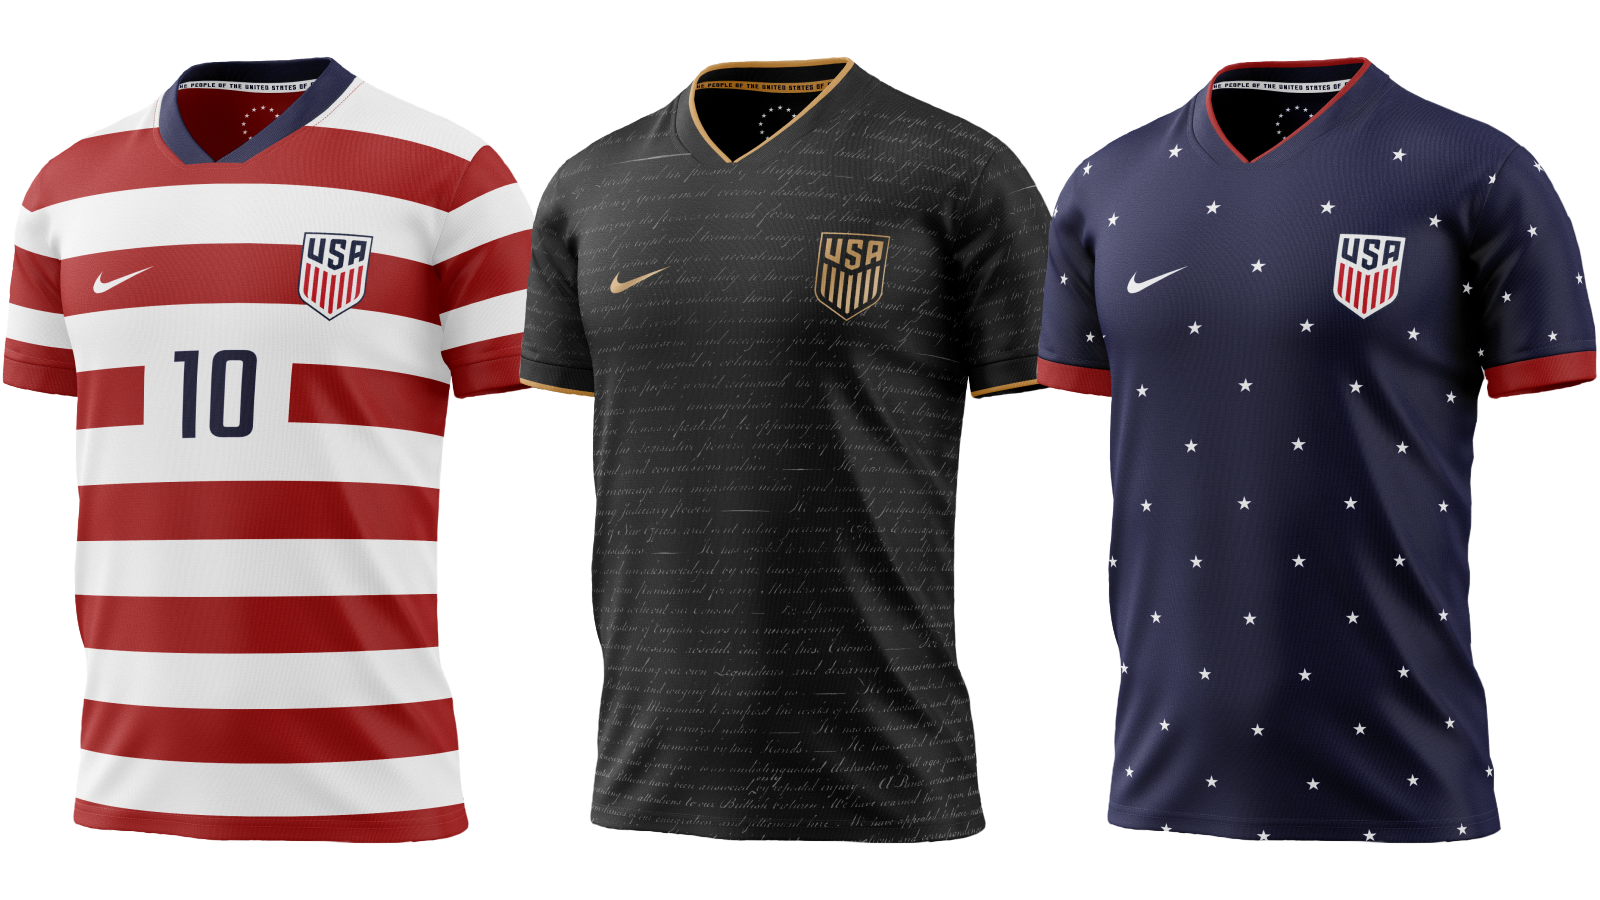 U.S. Soccer needs an identity, and the Waldo jersey is the answer